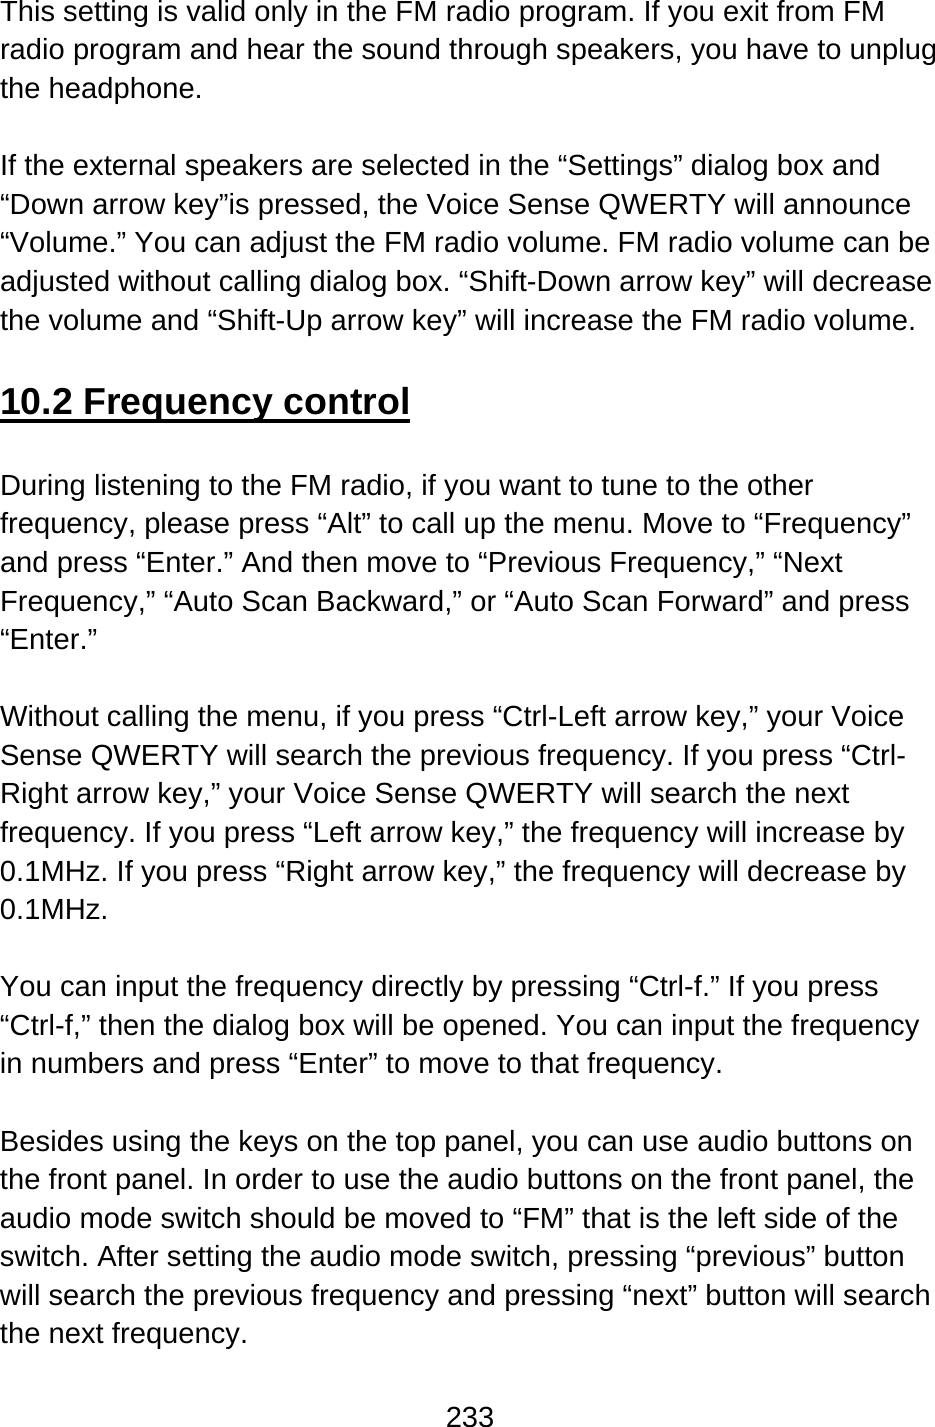 233  This setting is valid only in the FM radio program. If you exit from FM radio program and hear the sound through speakers, you have to unplug the headphone.  If the external speakers are selected in the “Settings” dialog box and “Down arrow key”is pressed, the Voice Sense QWERTY will announce “Volume.” You can adjust the FM radio volume. FM radio volume can be adjusted without calling dialog box. “Shift-Down arrow key” will decrease the volume and “Shift-Up arrow key” will increase the FM radio volume.  10.2 Frequency control  During listening to the FM radio, if you want to tune to the other frequency, please press “Alt” to call up the menu. Move to “Frequency” and press “Enter.” And then move to “Previous Frequency,” “Next Frequency,” “Auto Scan Backward,” or “Auto Scan Forward” and press “Enter.”  Without calling the menu, if you press “Ctrl-Left arrow key,” your Voice Sense QWERTY will search the previous frequency. If you press “Ctrl-Right arrow key,” your Voice Sense QWERTY will search the next frequency. If you press “Left arrow key,” the frequency will increase by 0.1MHz. If you press “Right arrow key,” the frequency will decrease by 0.1MHz.  You can input the frequency directly by pressing “Ctrl-f.” If you press “Ctrl-f,” then the dialog box will be opened. You can input the frequency in numbers and press “Enter” to move to that frequency.  Besides using the keys on the top panel, you can use audio buttons on the front panel. In order to use the audio buttons on the front panel, the audio mode switch should be moved to “FM” that is the left side of the switch. After setting the audio mode switch, pressing “previous” button will search the previous frequency and pressing “next” button will search the next frequency.  